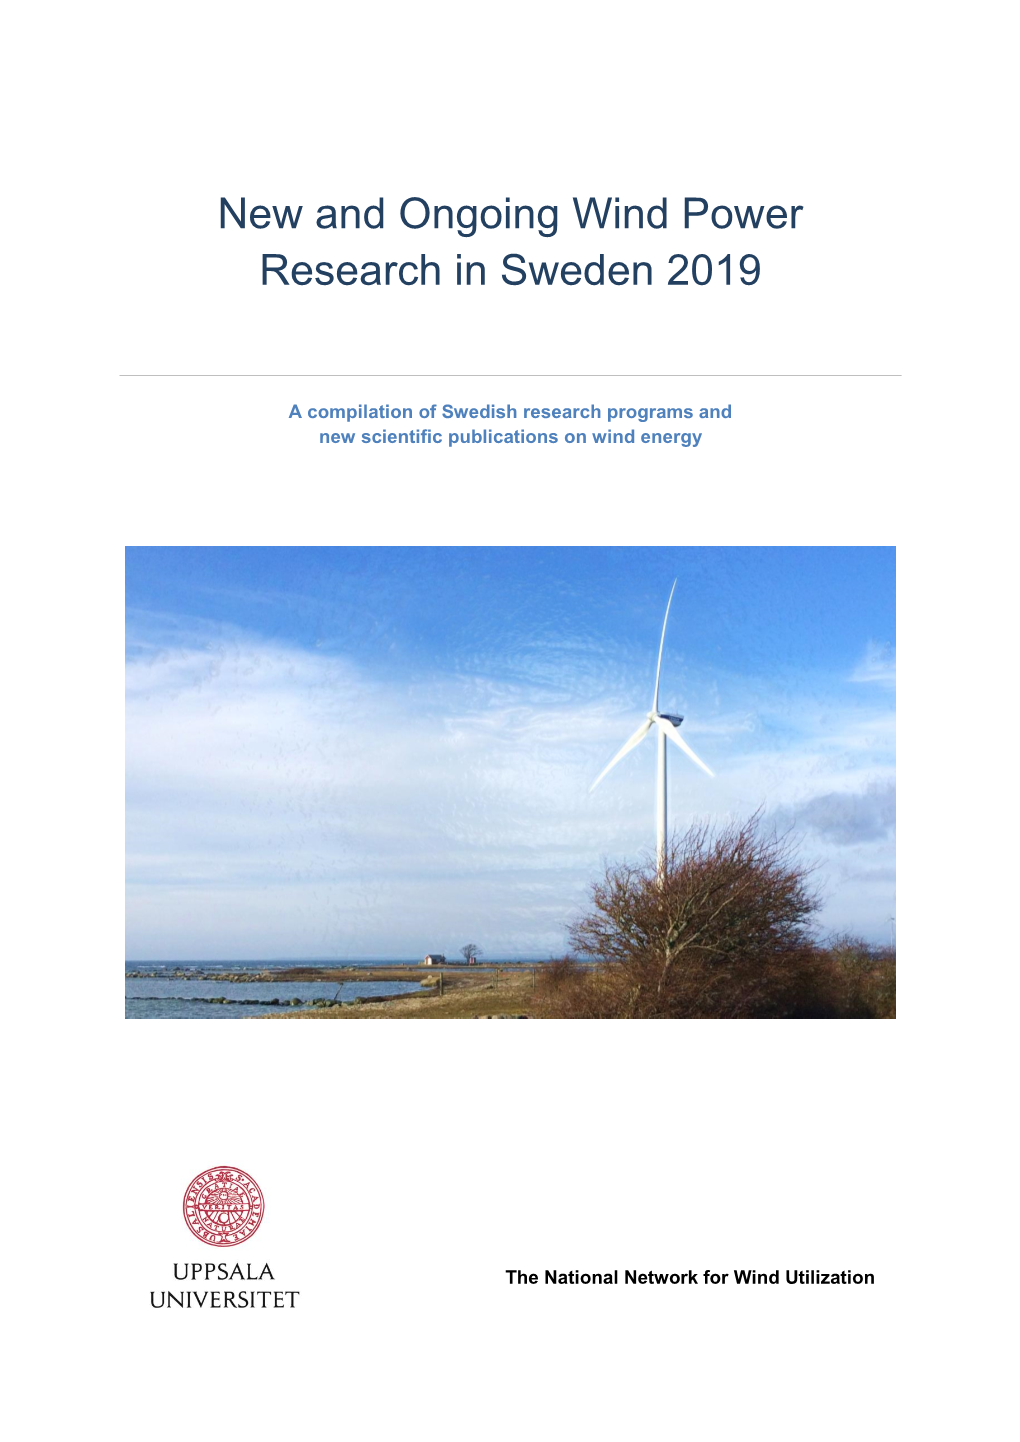 New and Ongoing Wind Power Research in Sweden 2019